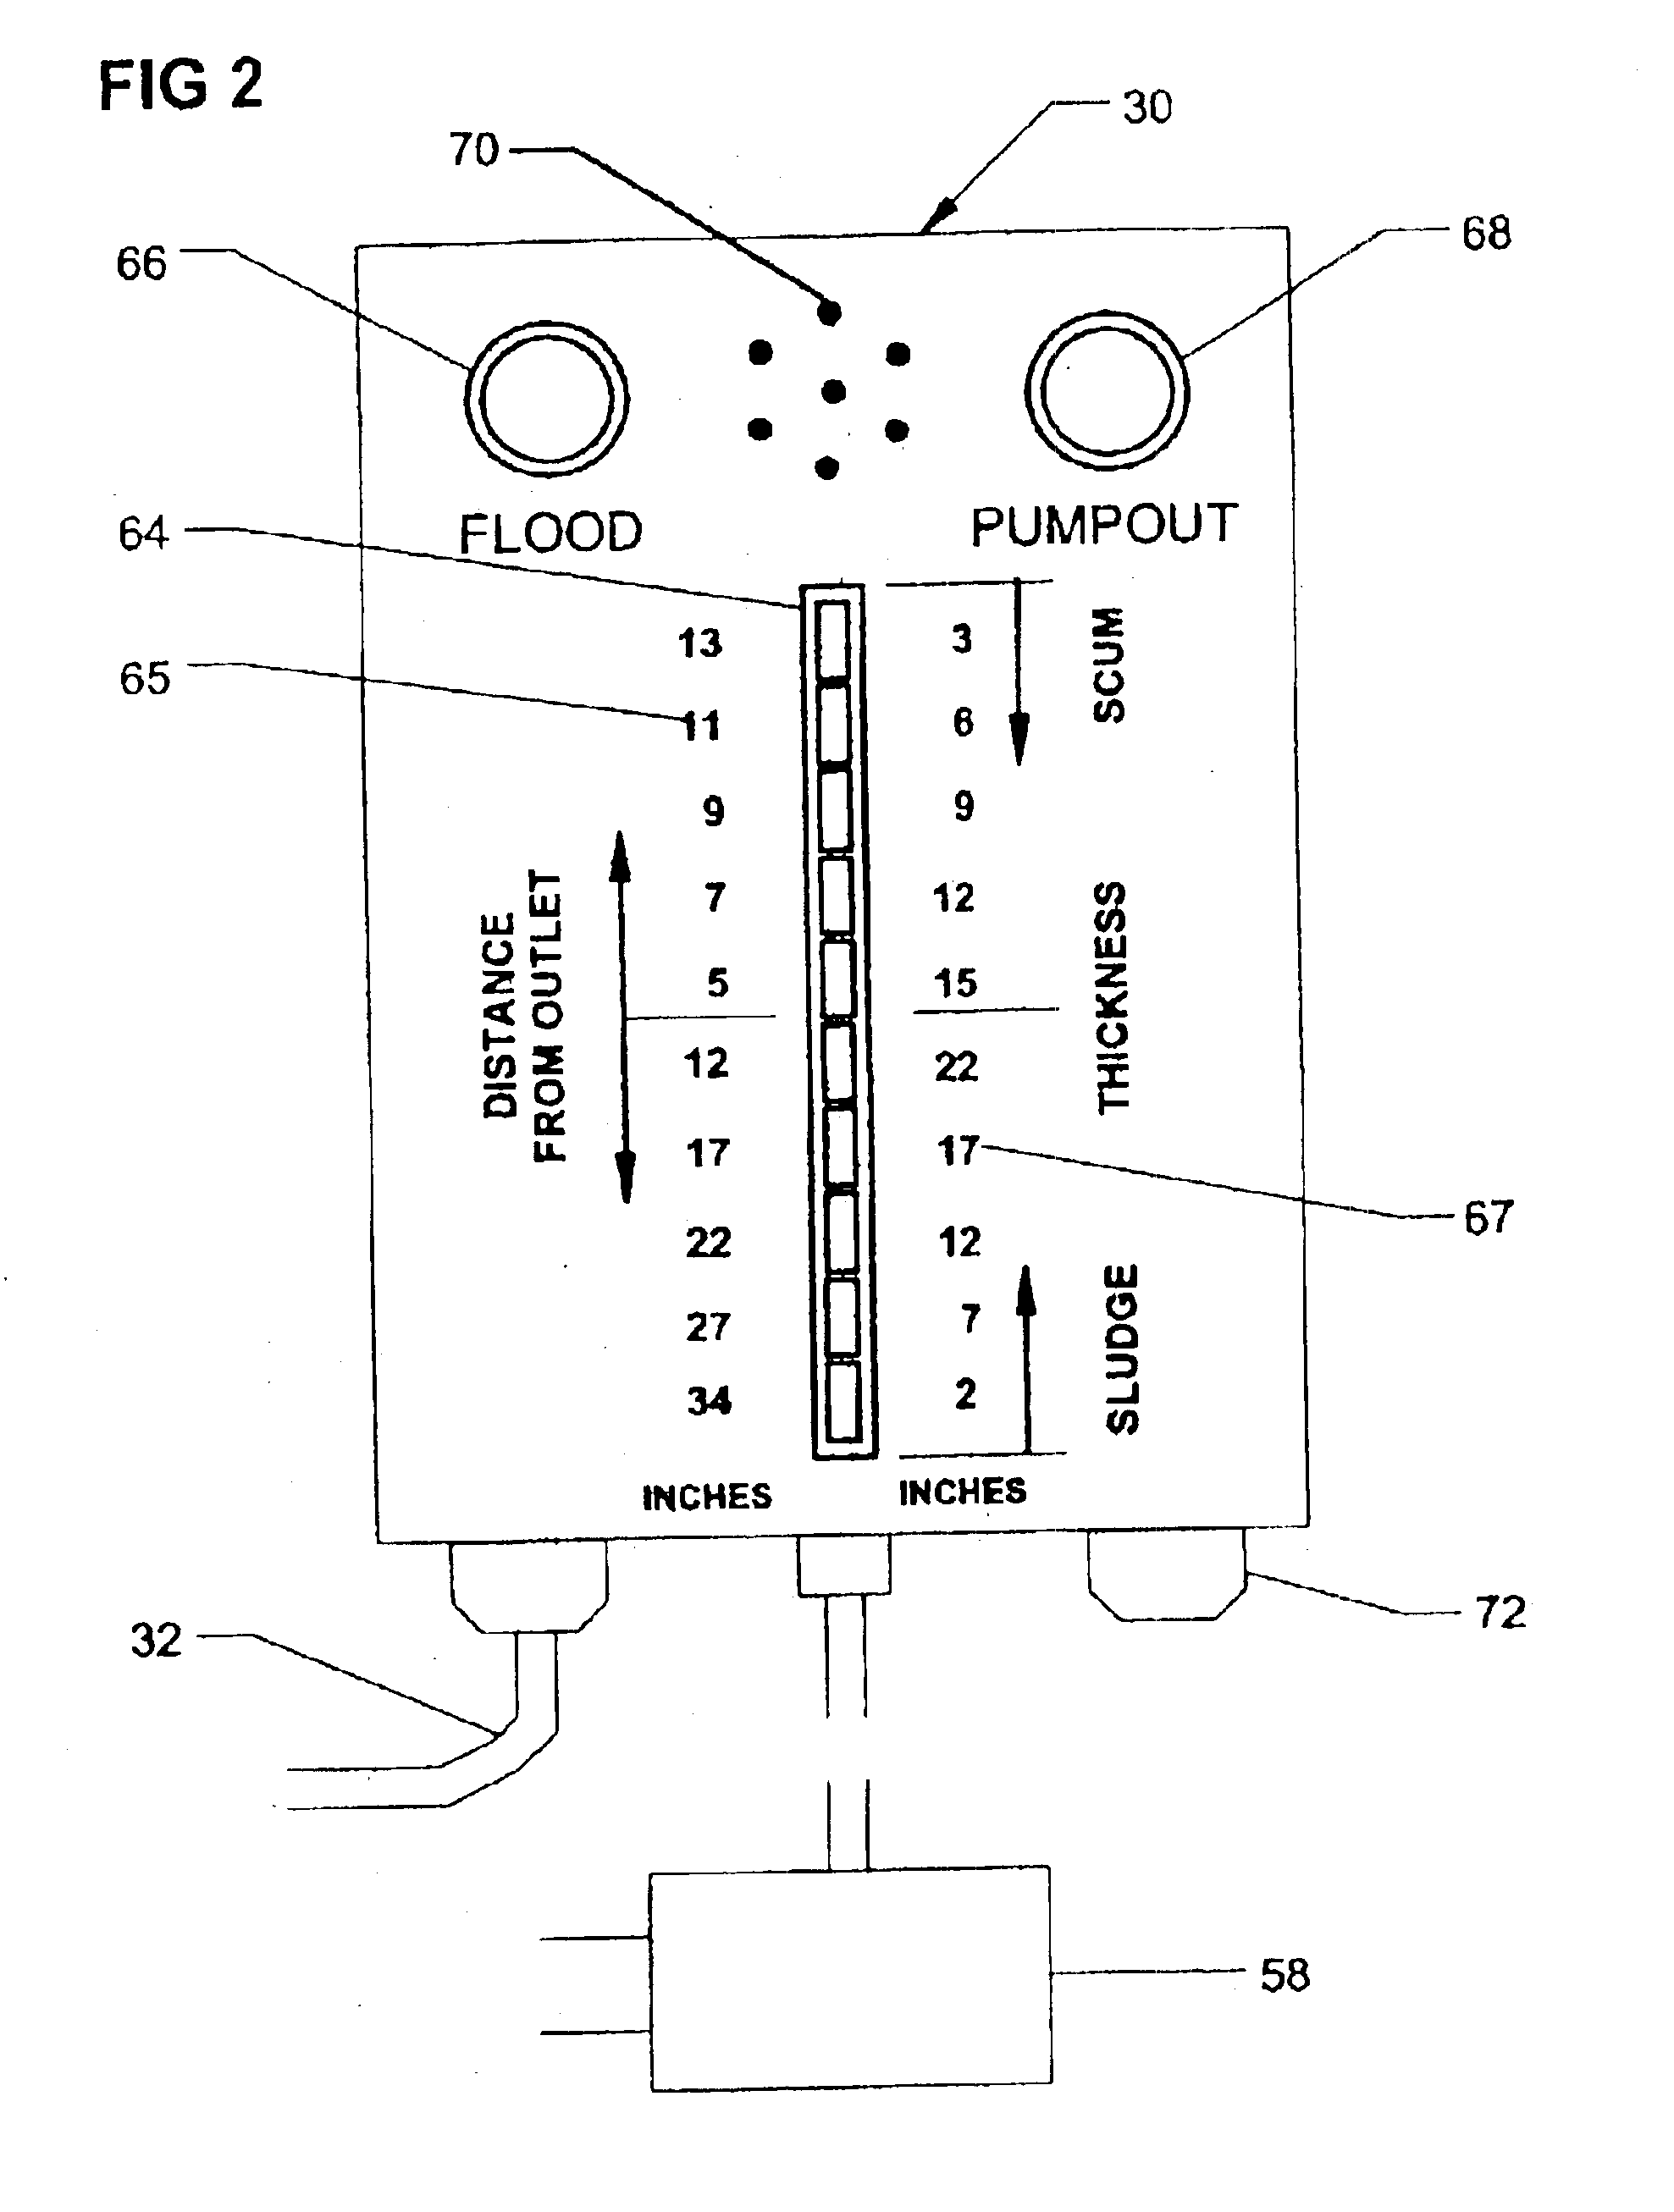 Monitoring system with thermal probe for detection of layers in stratified media